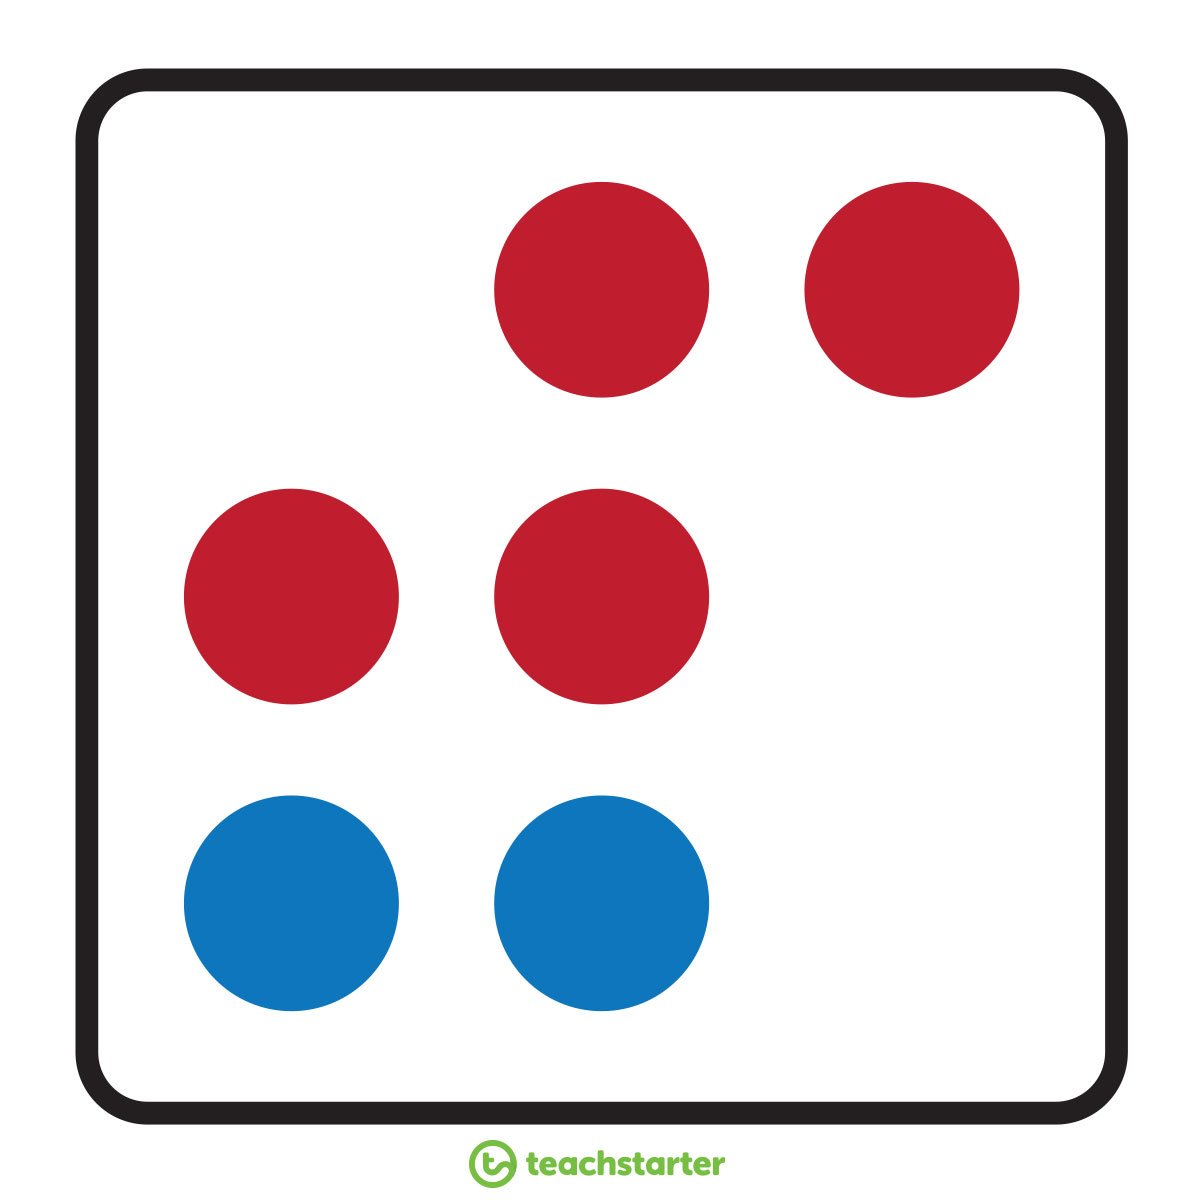 die with red and blue dots 